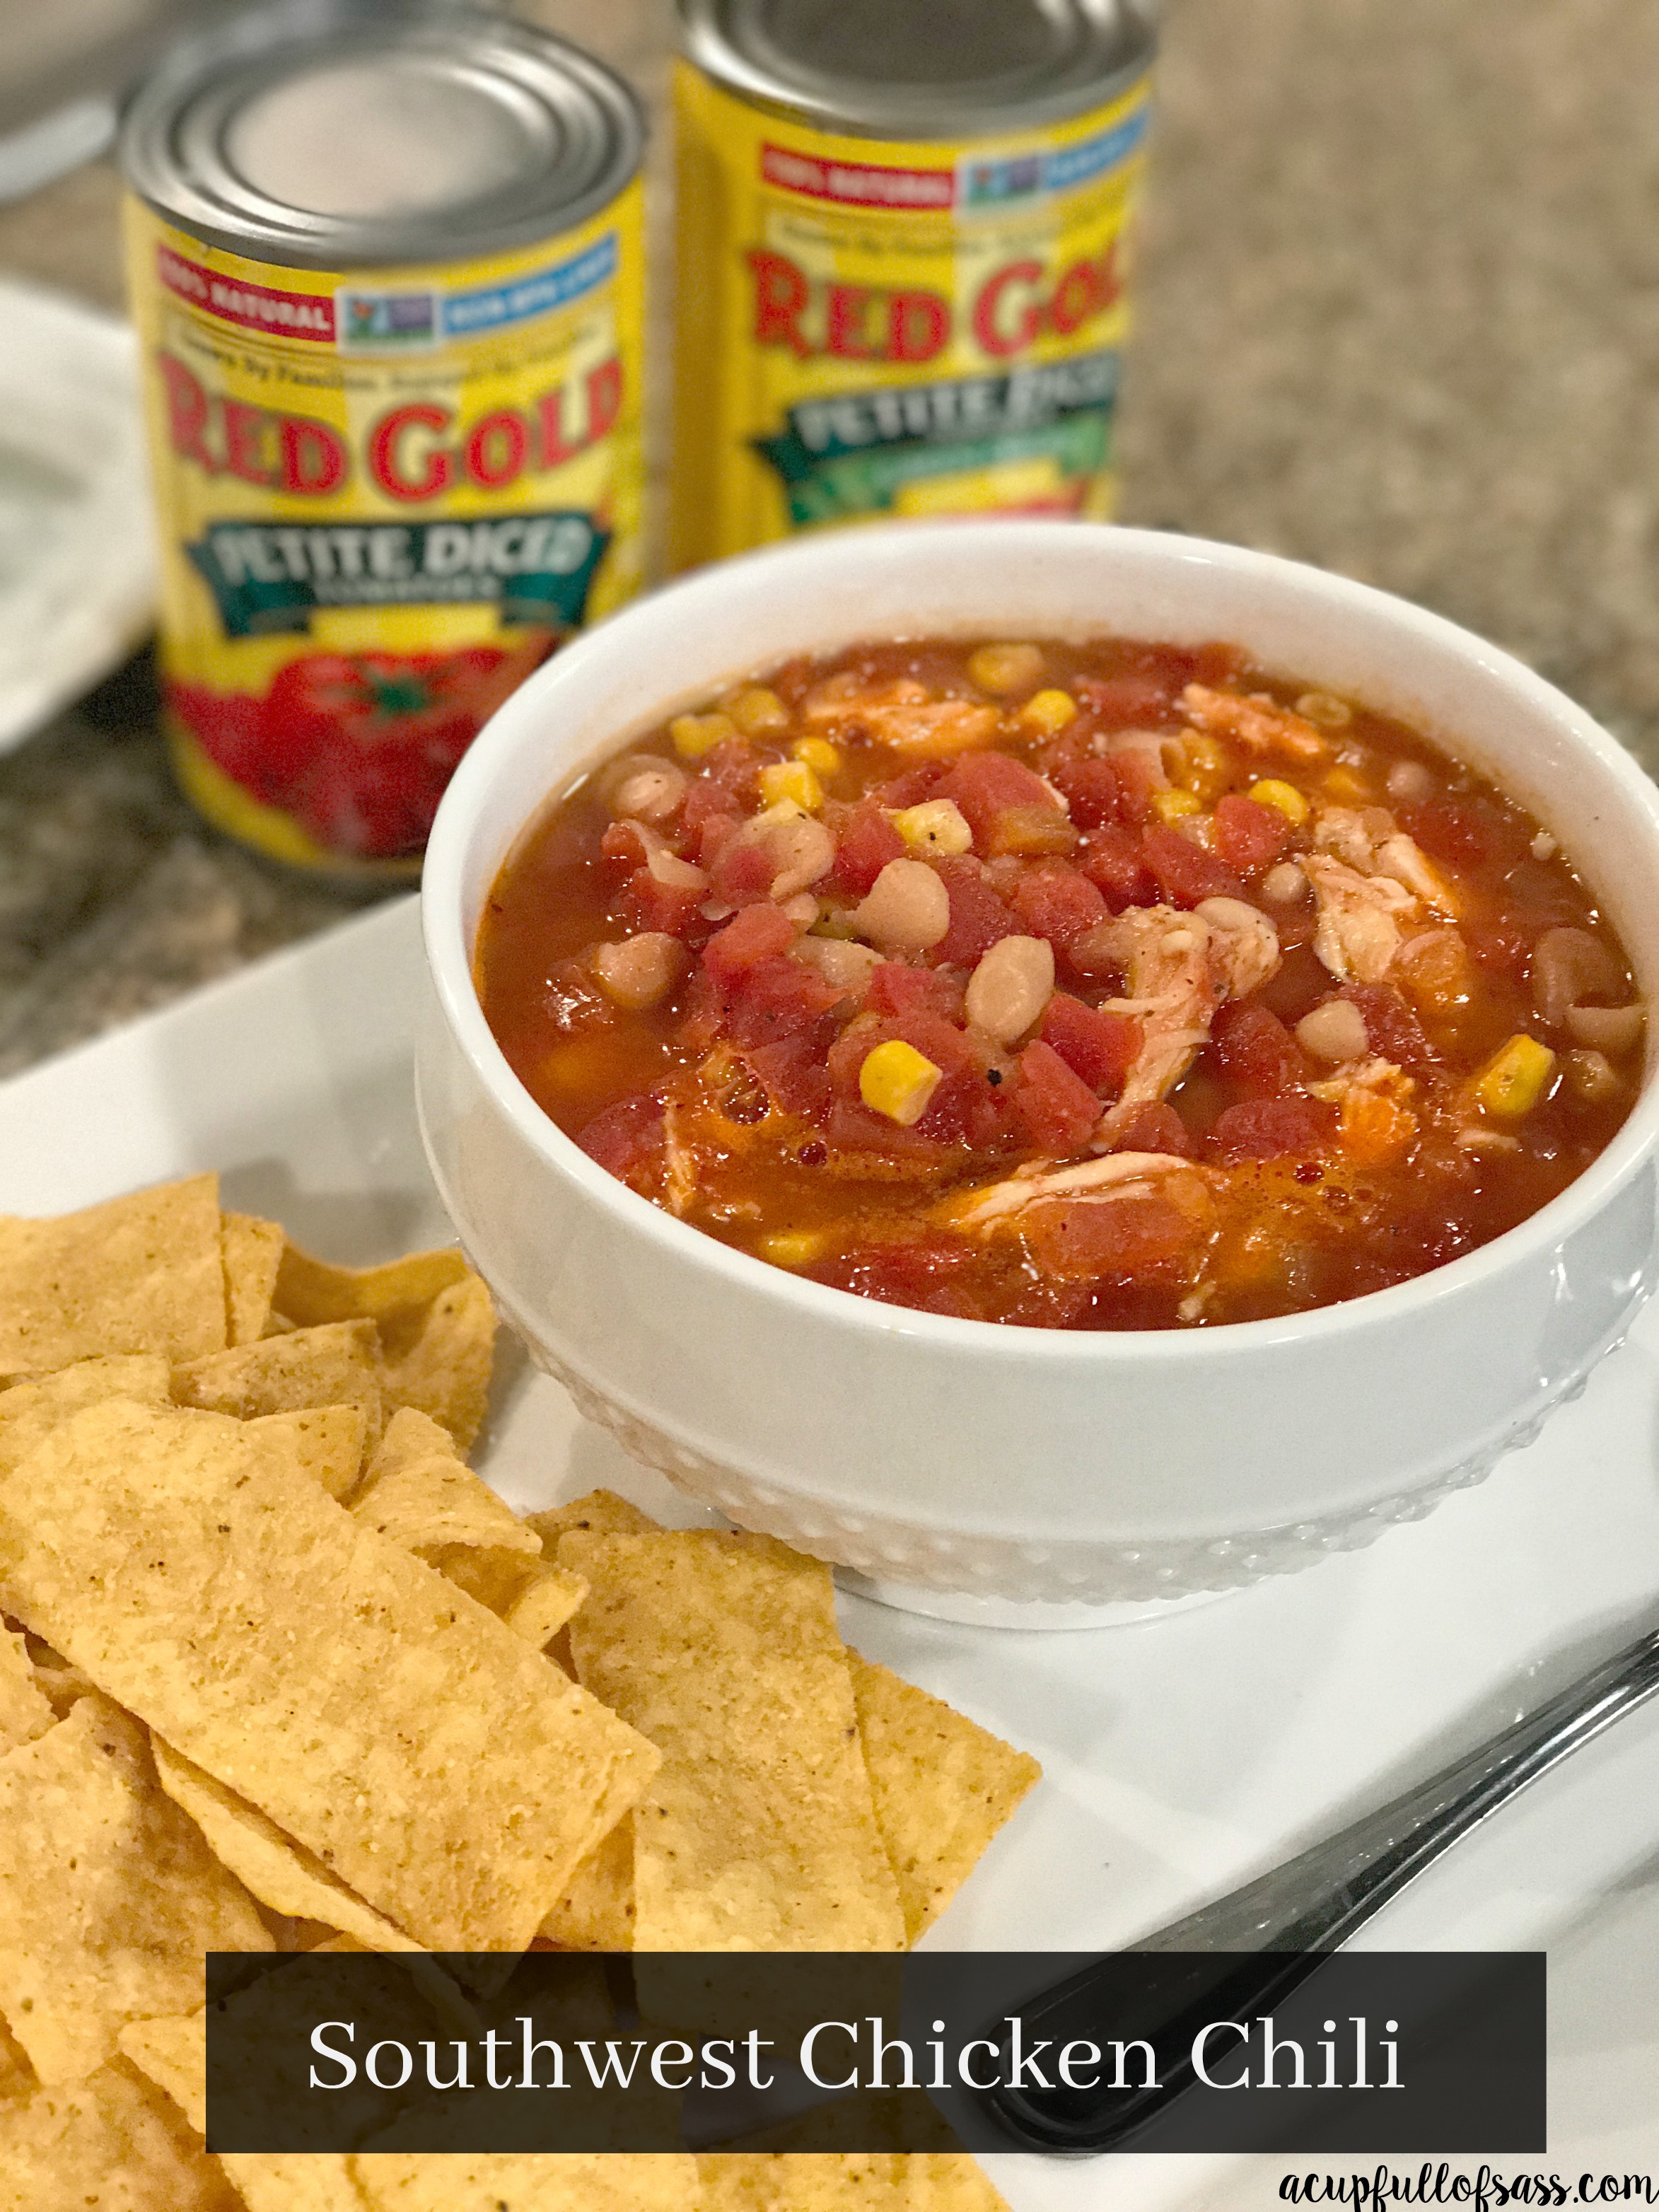 Southwest Chicken Chili by Red Gold Tomatoes